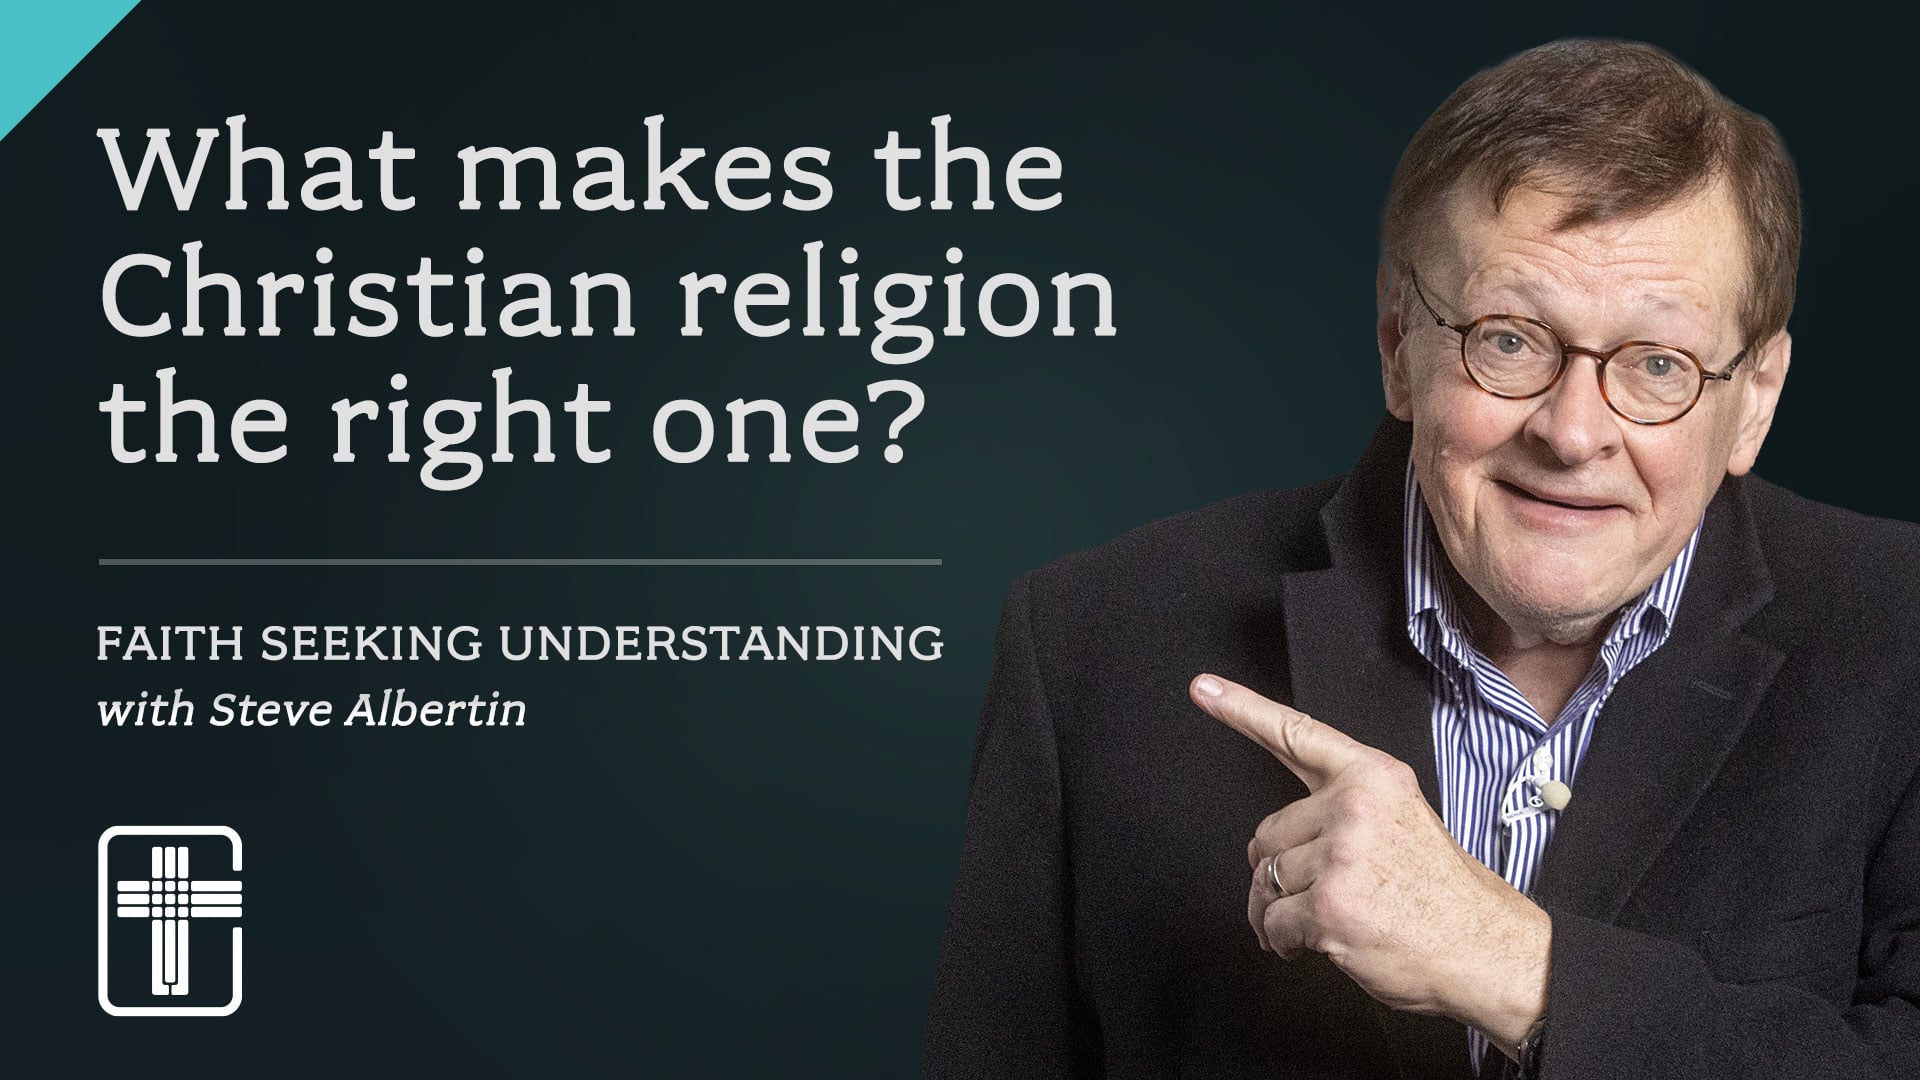 What make the Christian religion ... the right one?